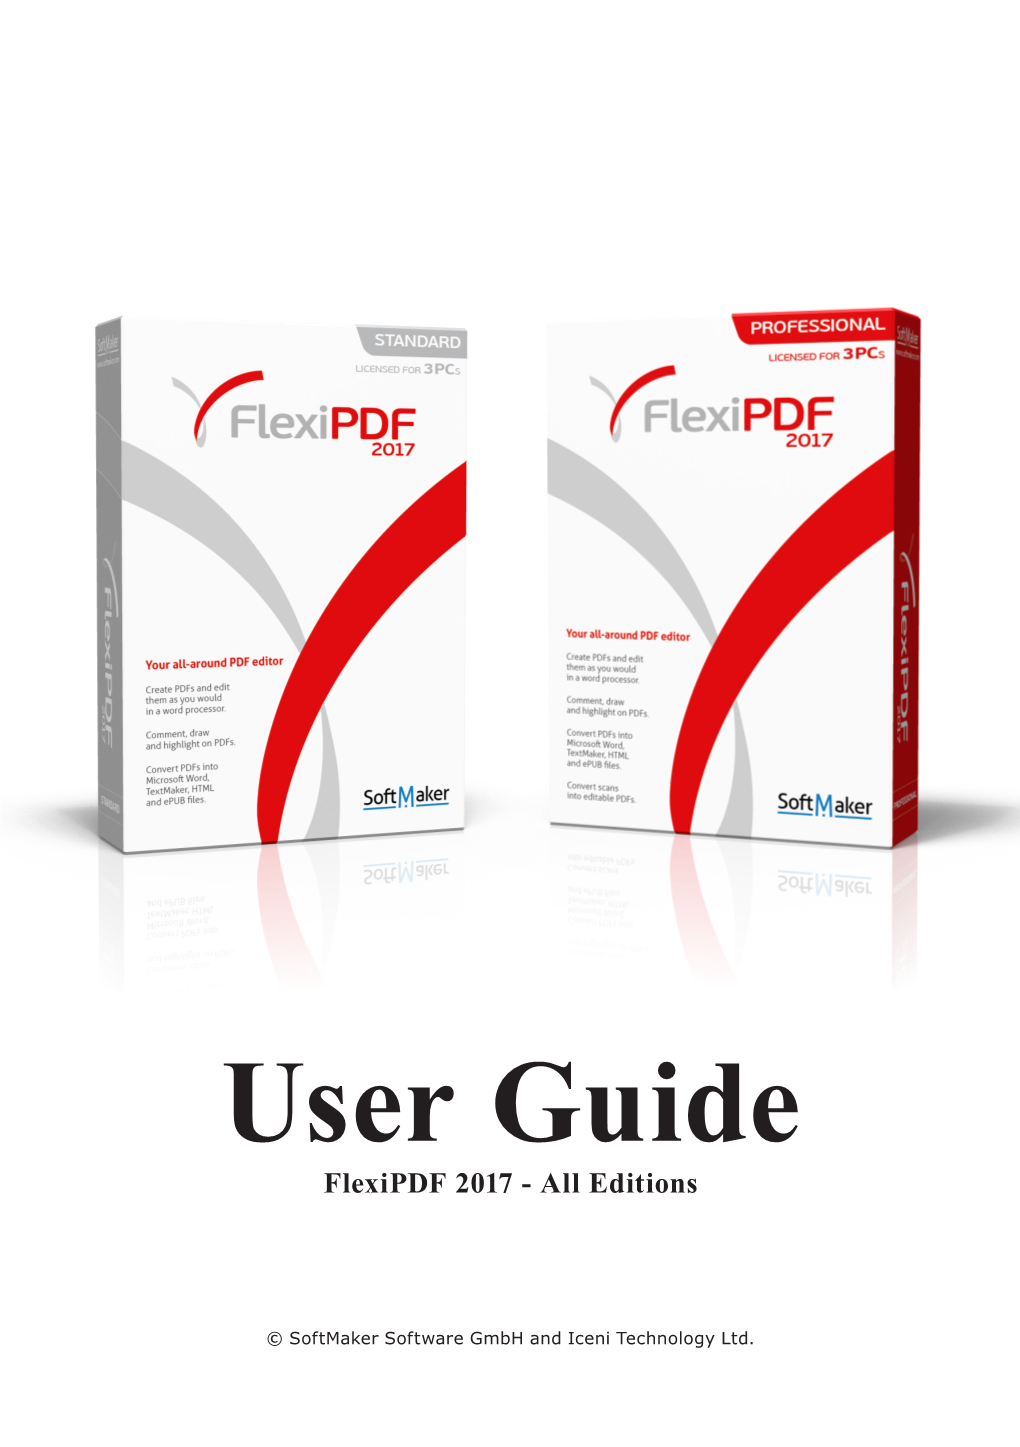 User Guide Flexipdf 2017 - All Editions